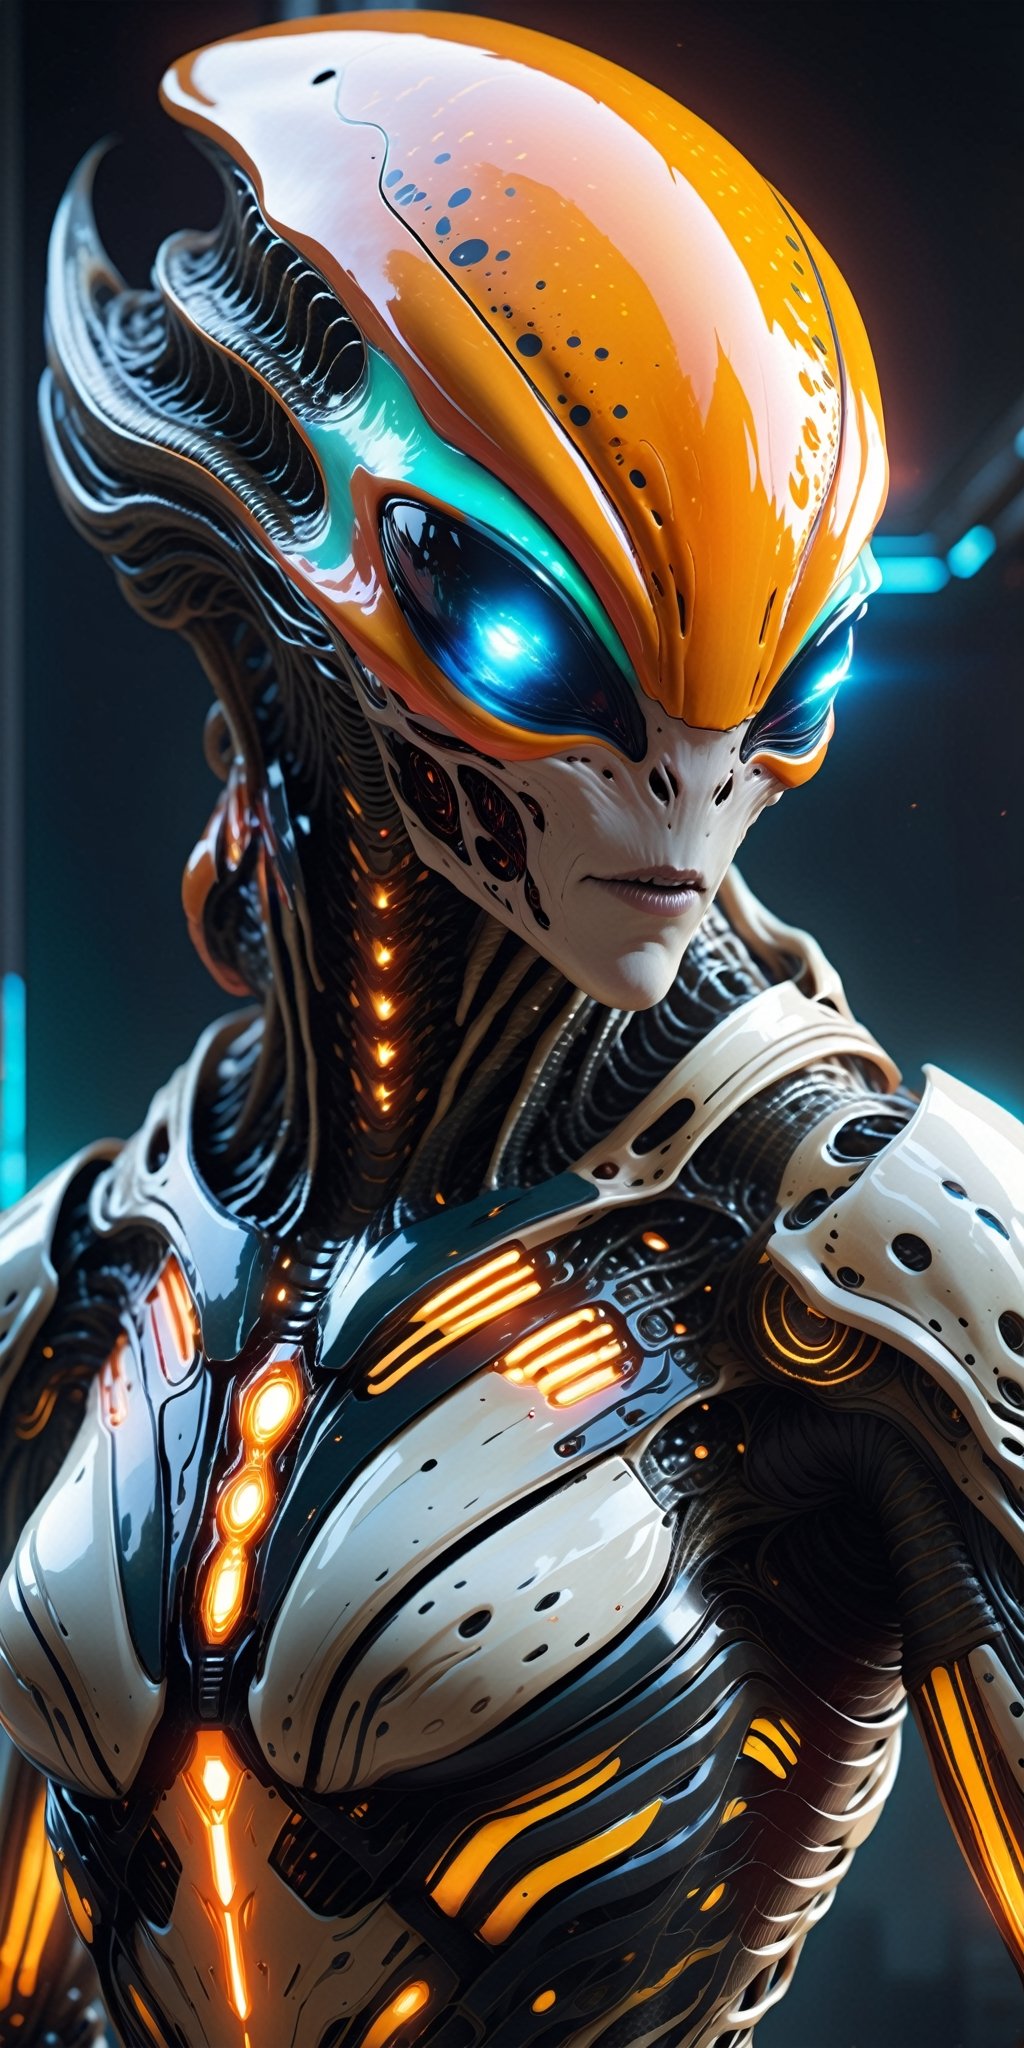 Create a spine-chilling image of an alien creature adorned in Hi-Tech biometric glowing armor, radiating a deadly and intimidating aura. Showcase the alien's otherworldly features and cutting-edge technology, resulting in a mesmerizing and frightening visual narrative.